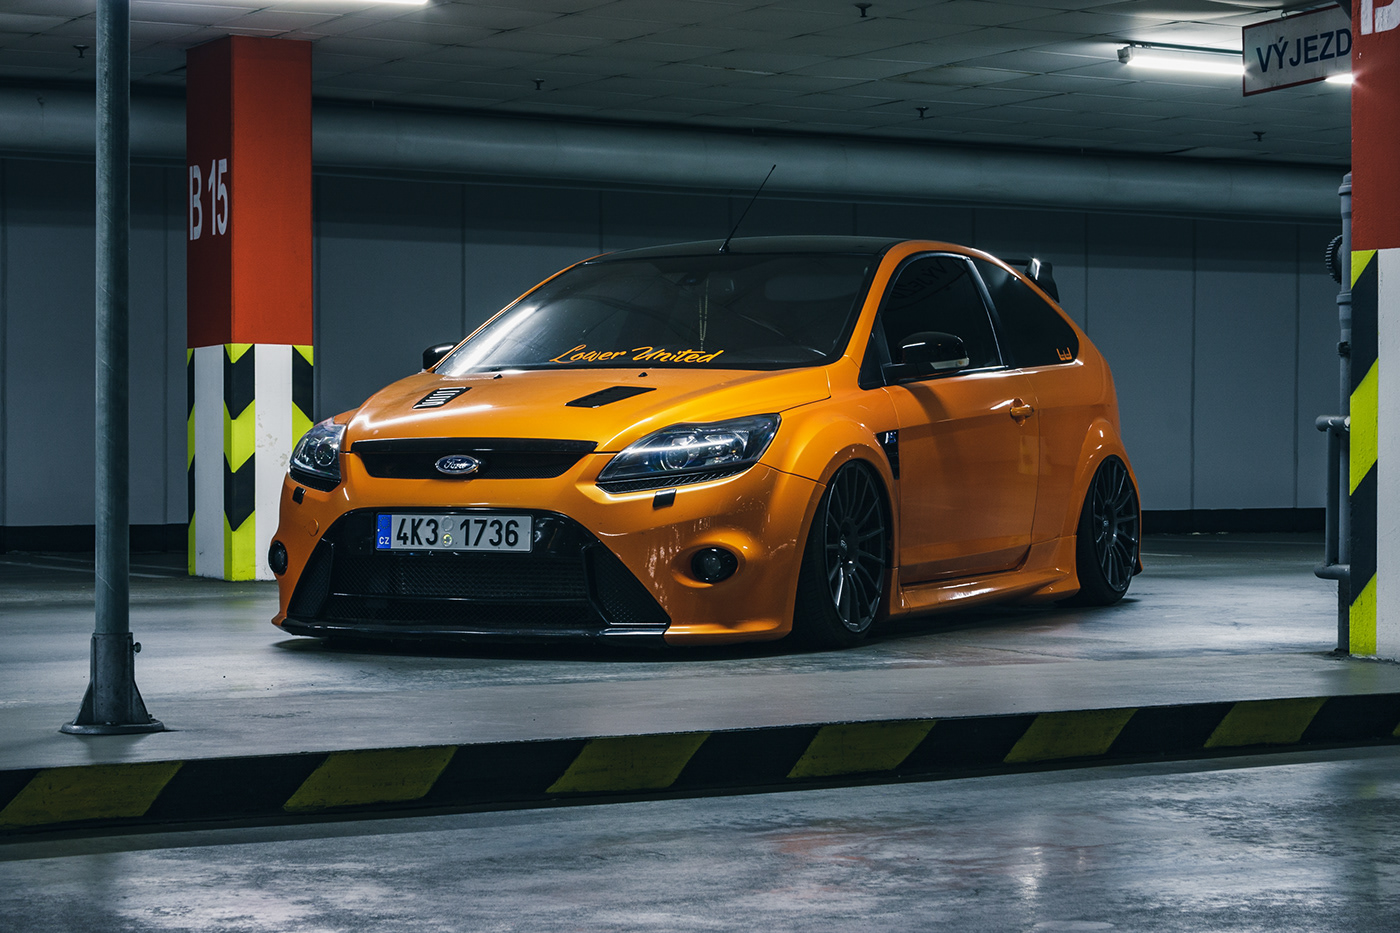 ford focus st AirLift tuning underground garage car photography stance car Ostrava